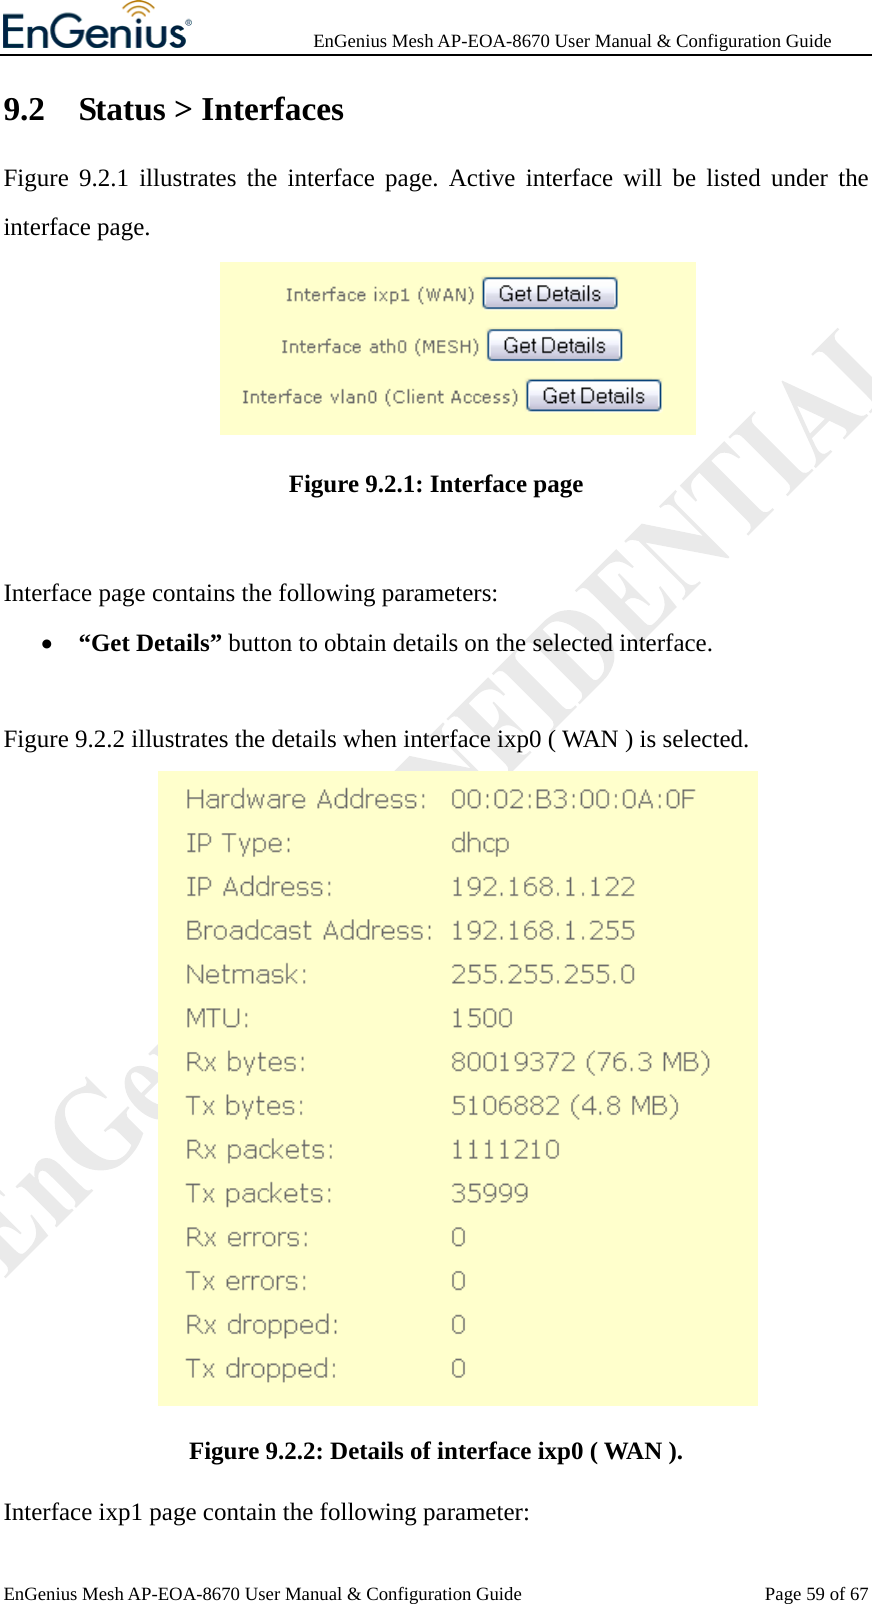              EnGenius Mesh AP-EOA-8670 User Manual &amp; Configuration Guide EnGenius Mesh AP-EOA-8670 User Manual &amp; Configuration Guide  Page 59 of 679.2 Status &gt; Interfaces Figure 9.2.1 illustrates the interface page. Active interface will be listed under the interface page.    Figure 9.2.1: Interface page  Interface page contains the following parameters: • “Get Details” button to obtain details on the selected interface.  Figure 9.2.2 illustrates the details when interface ixp0 ( WAN ) is selected.  Figure 9.2.2: Details of interface ixp0 ( WAN ). Interface ixp1 page contain the following parameter: 